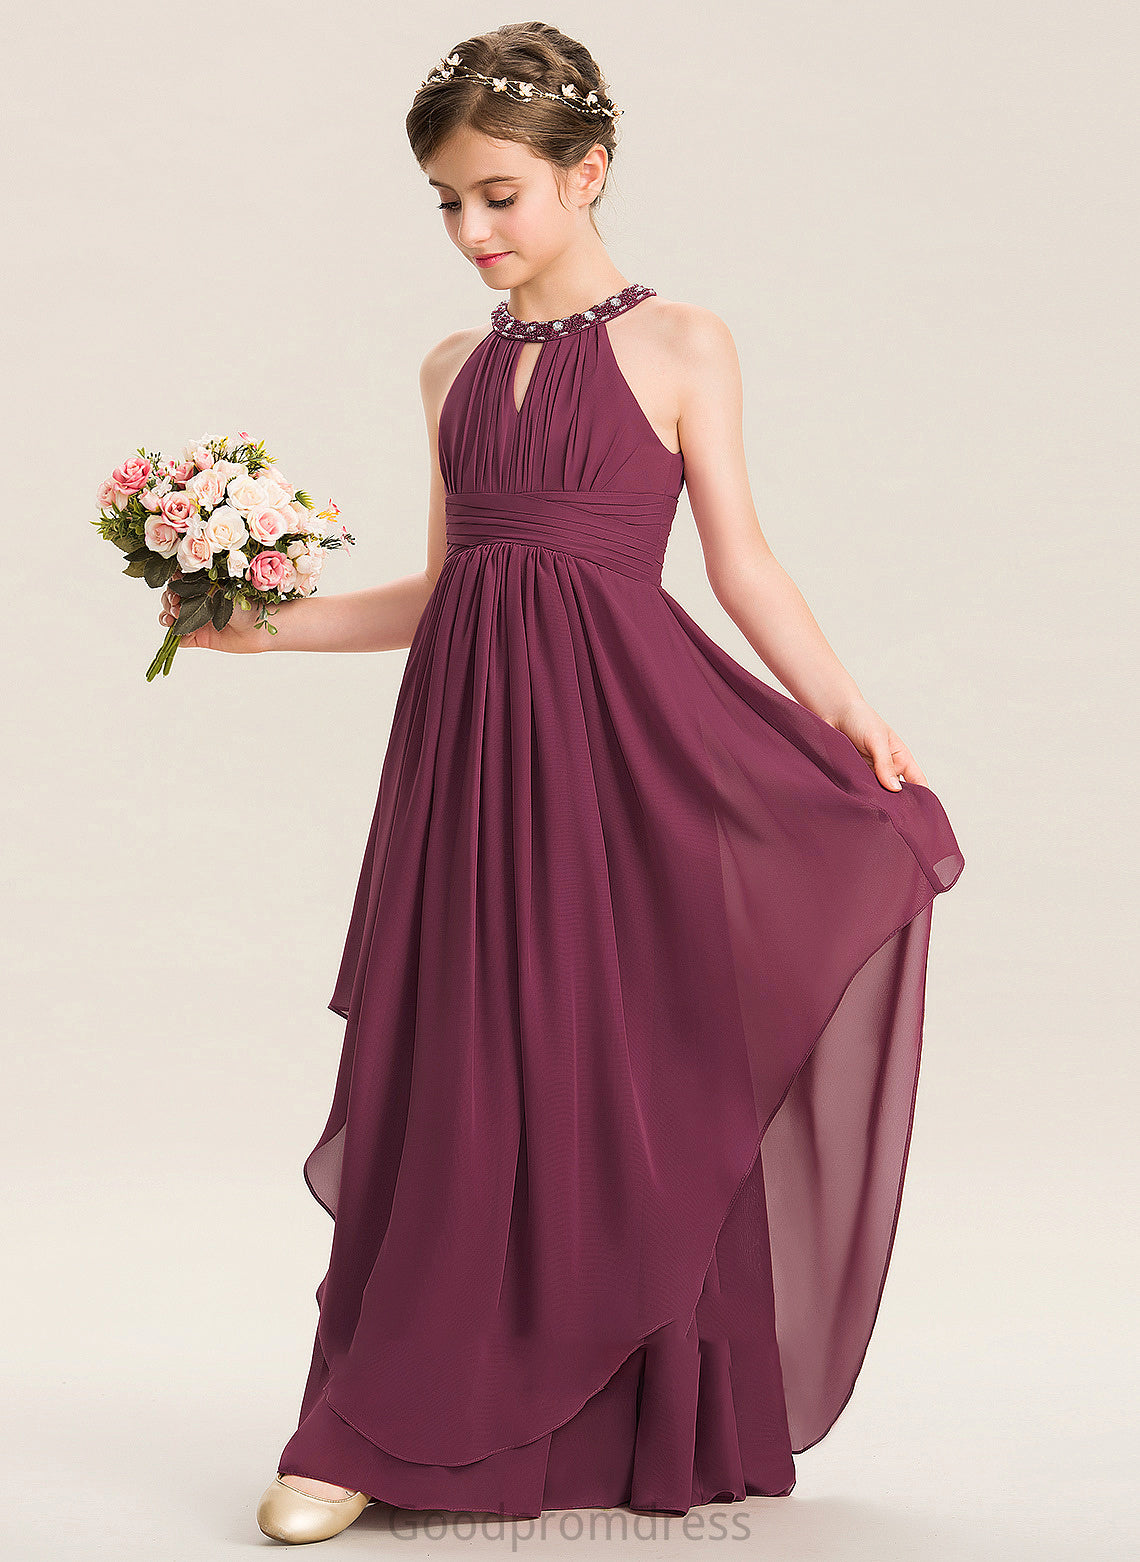 A-Line Ruffle Junior Bridesmaid Dresses With Floor-Length Beading Joselyn Neck Chiffon Scoop